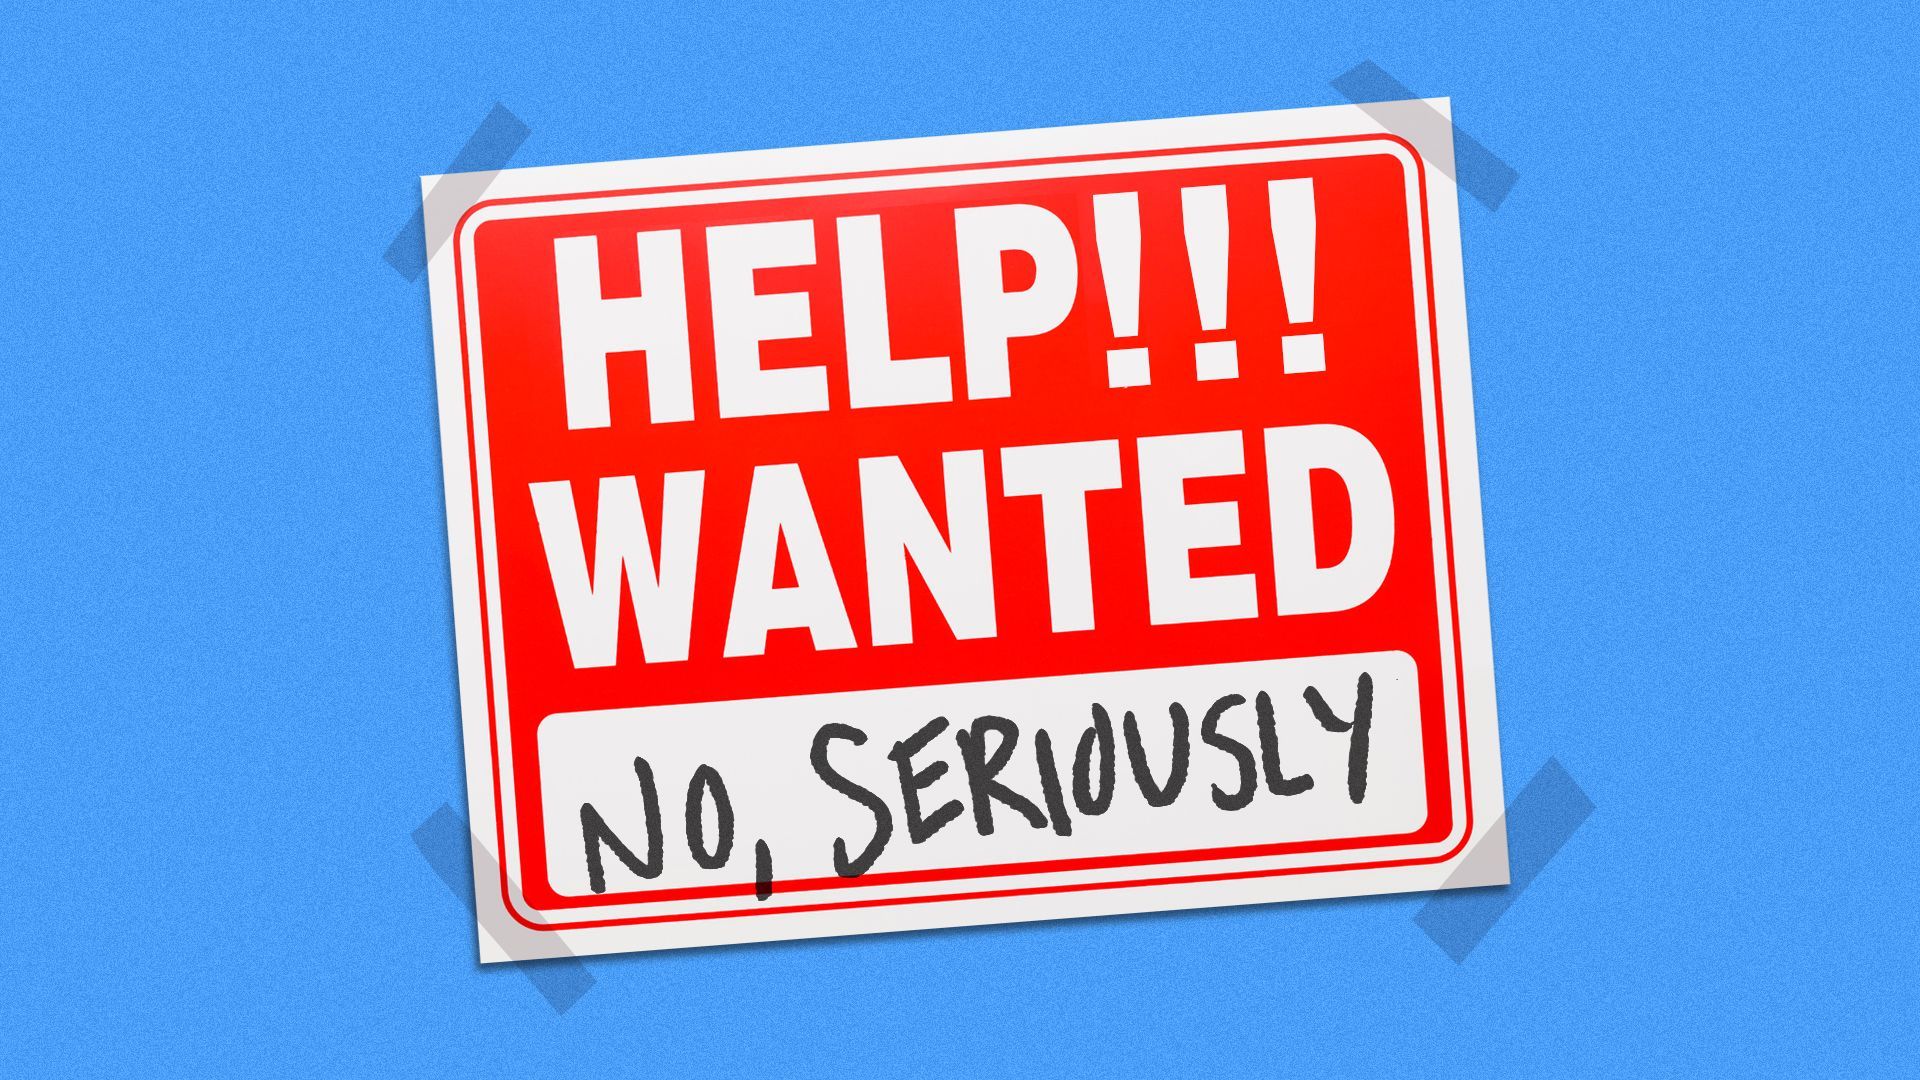 Illustration of a "help wanted" sign with multiple exclamation points and the words "no, seriously"